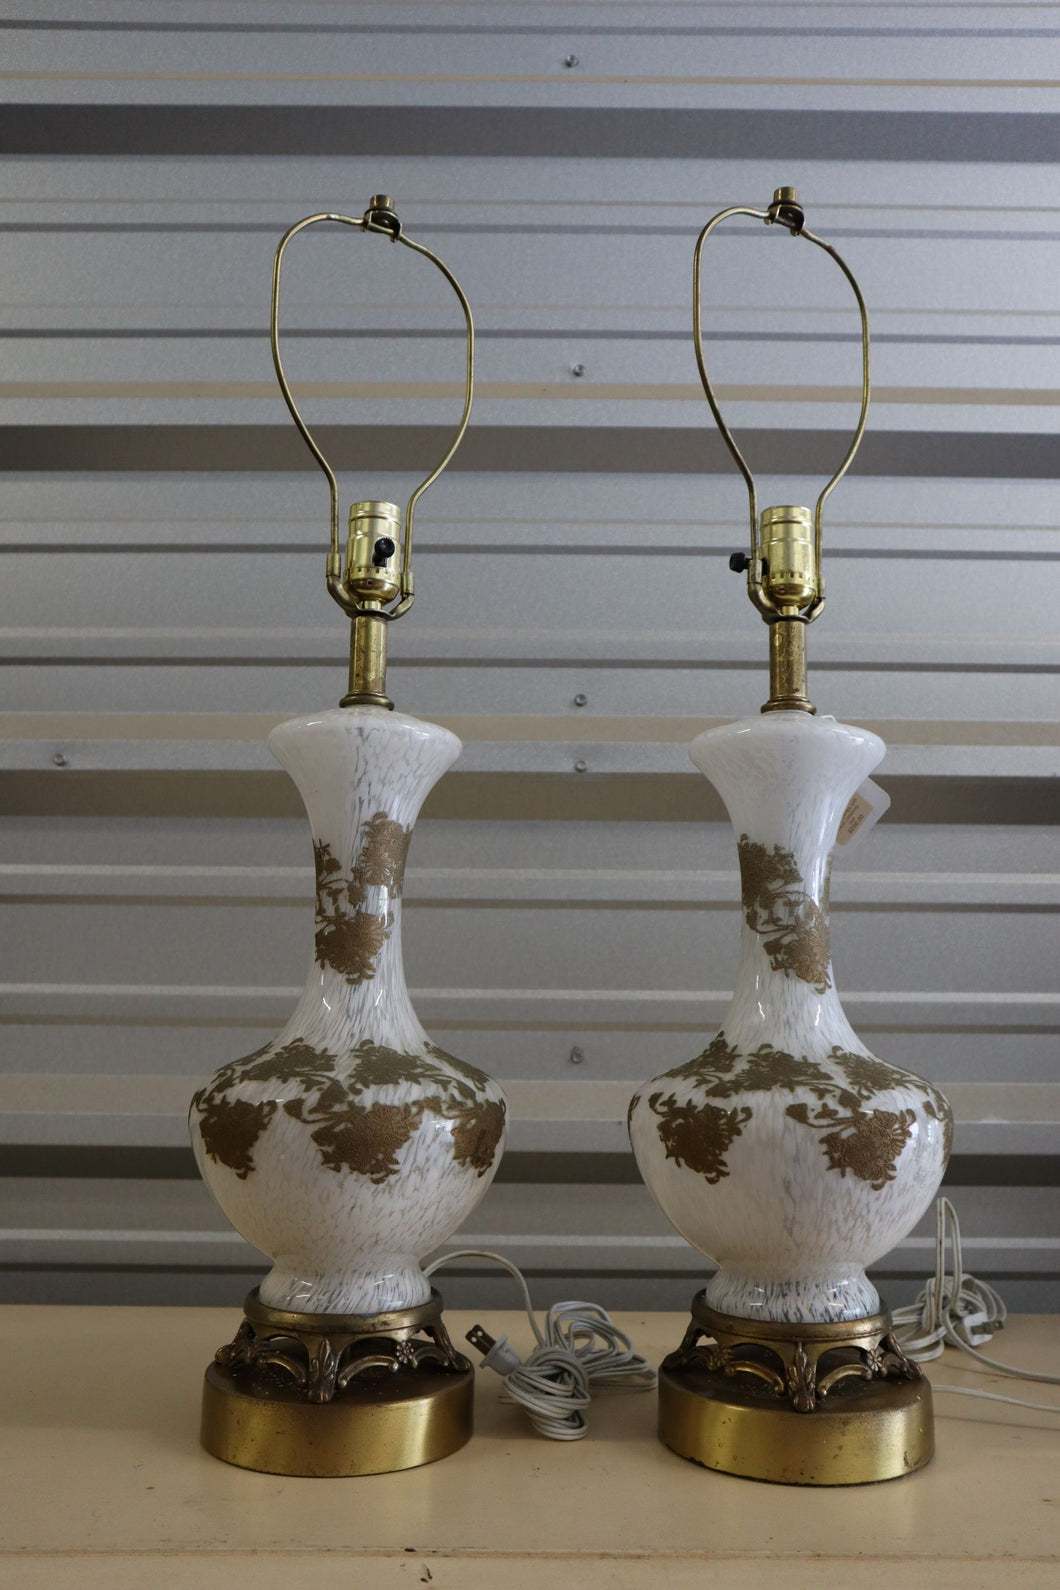 Vintage White Murano Lamps with Gold Detailing